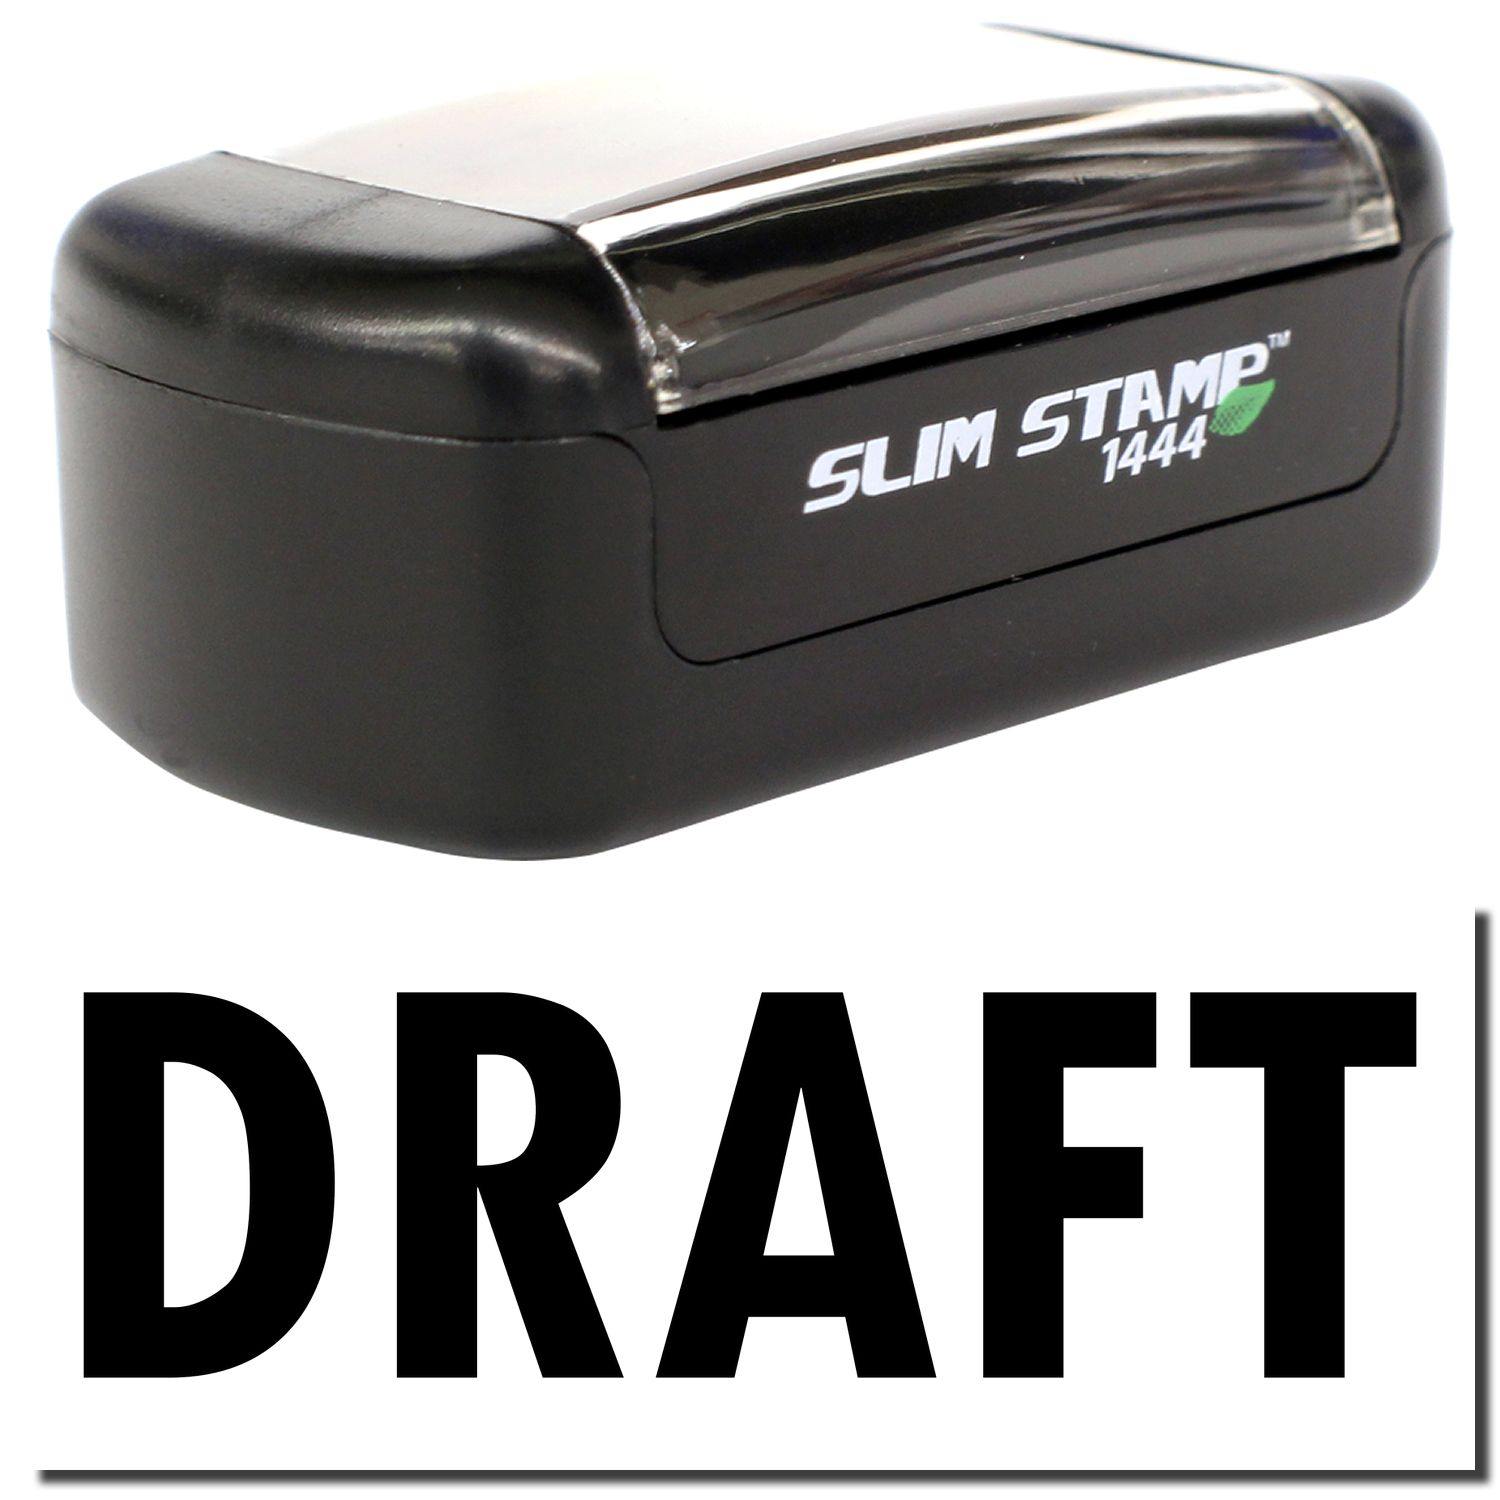 A stock office pre-inked stamp with a stamped image showing how the text "DRAFT" is displayed after stamping.